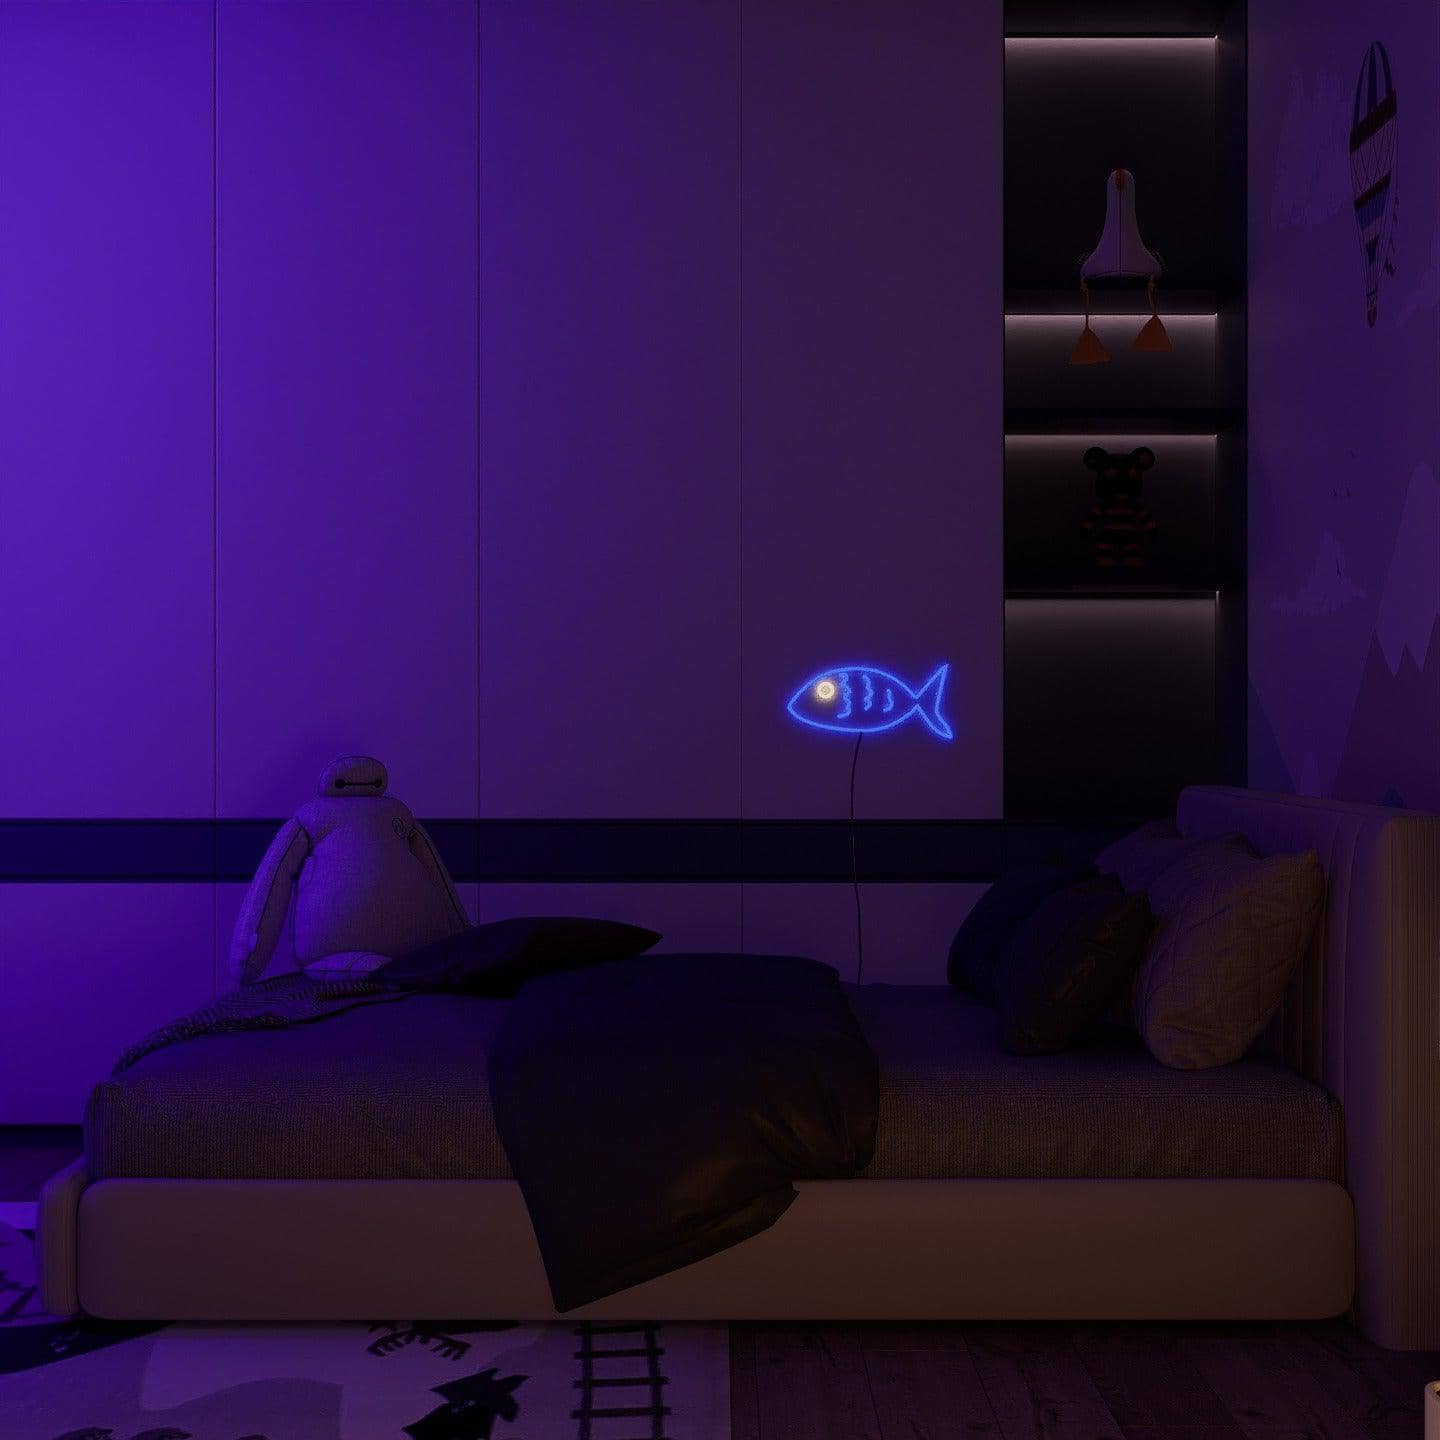 light-up-neon-lights-and-hang-them-in-your-bedroom-for-display-fishy-friend-blue